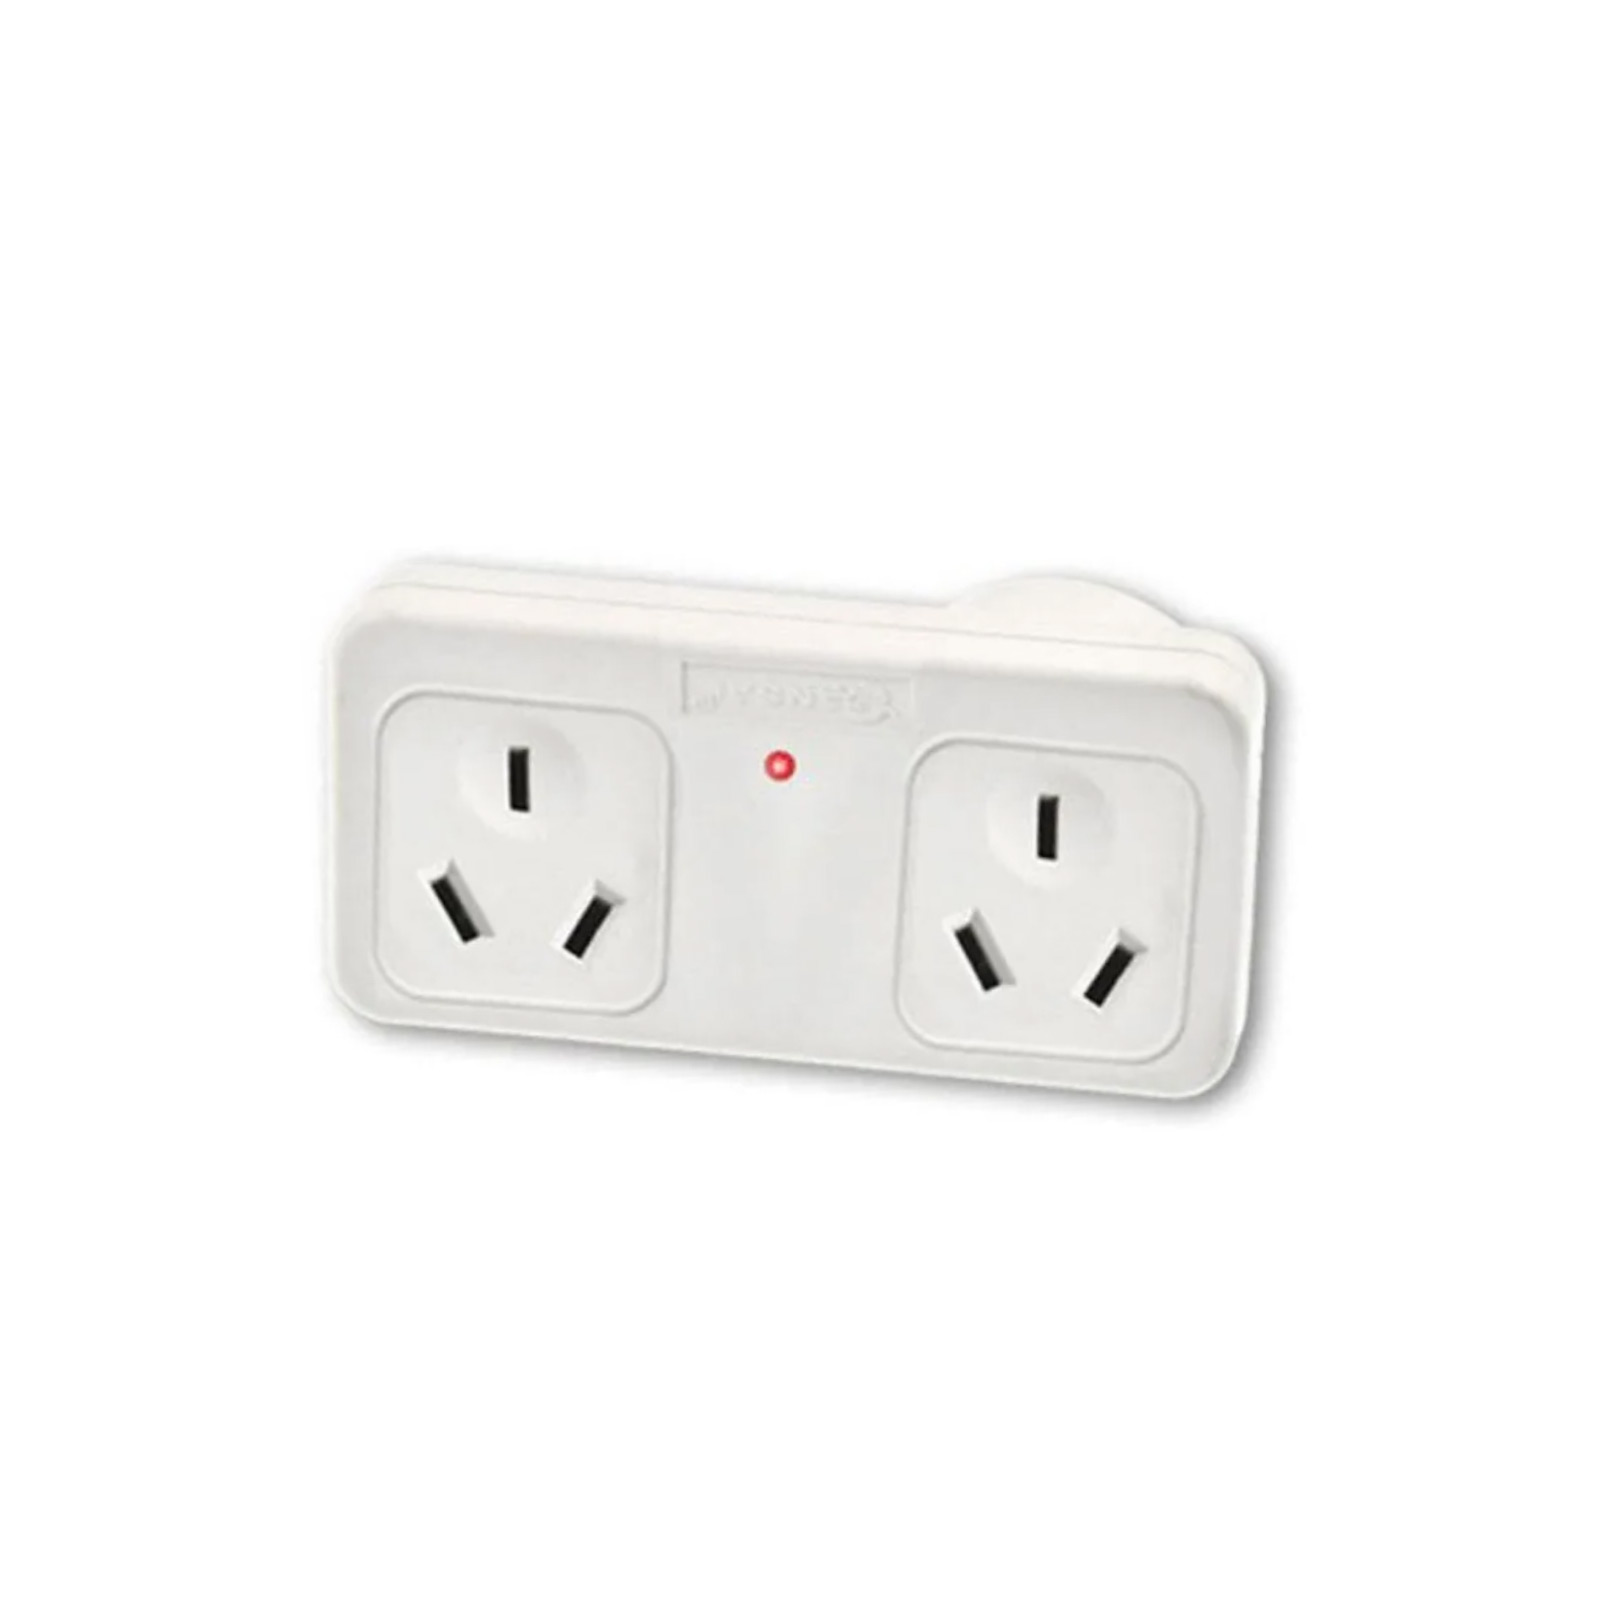 Powerpoint Surge Protector Adaptor Double – Right Hand